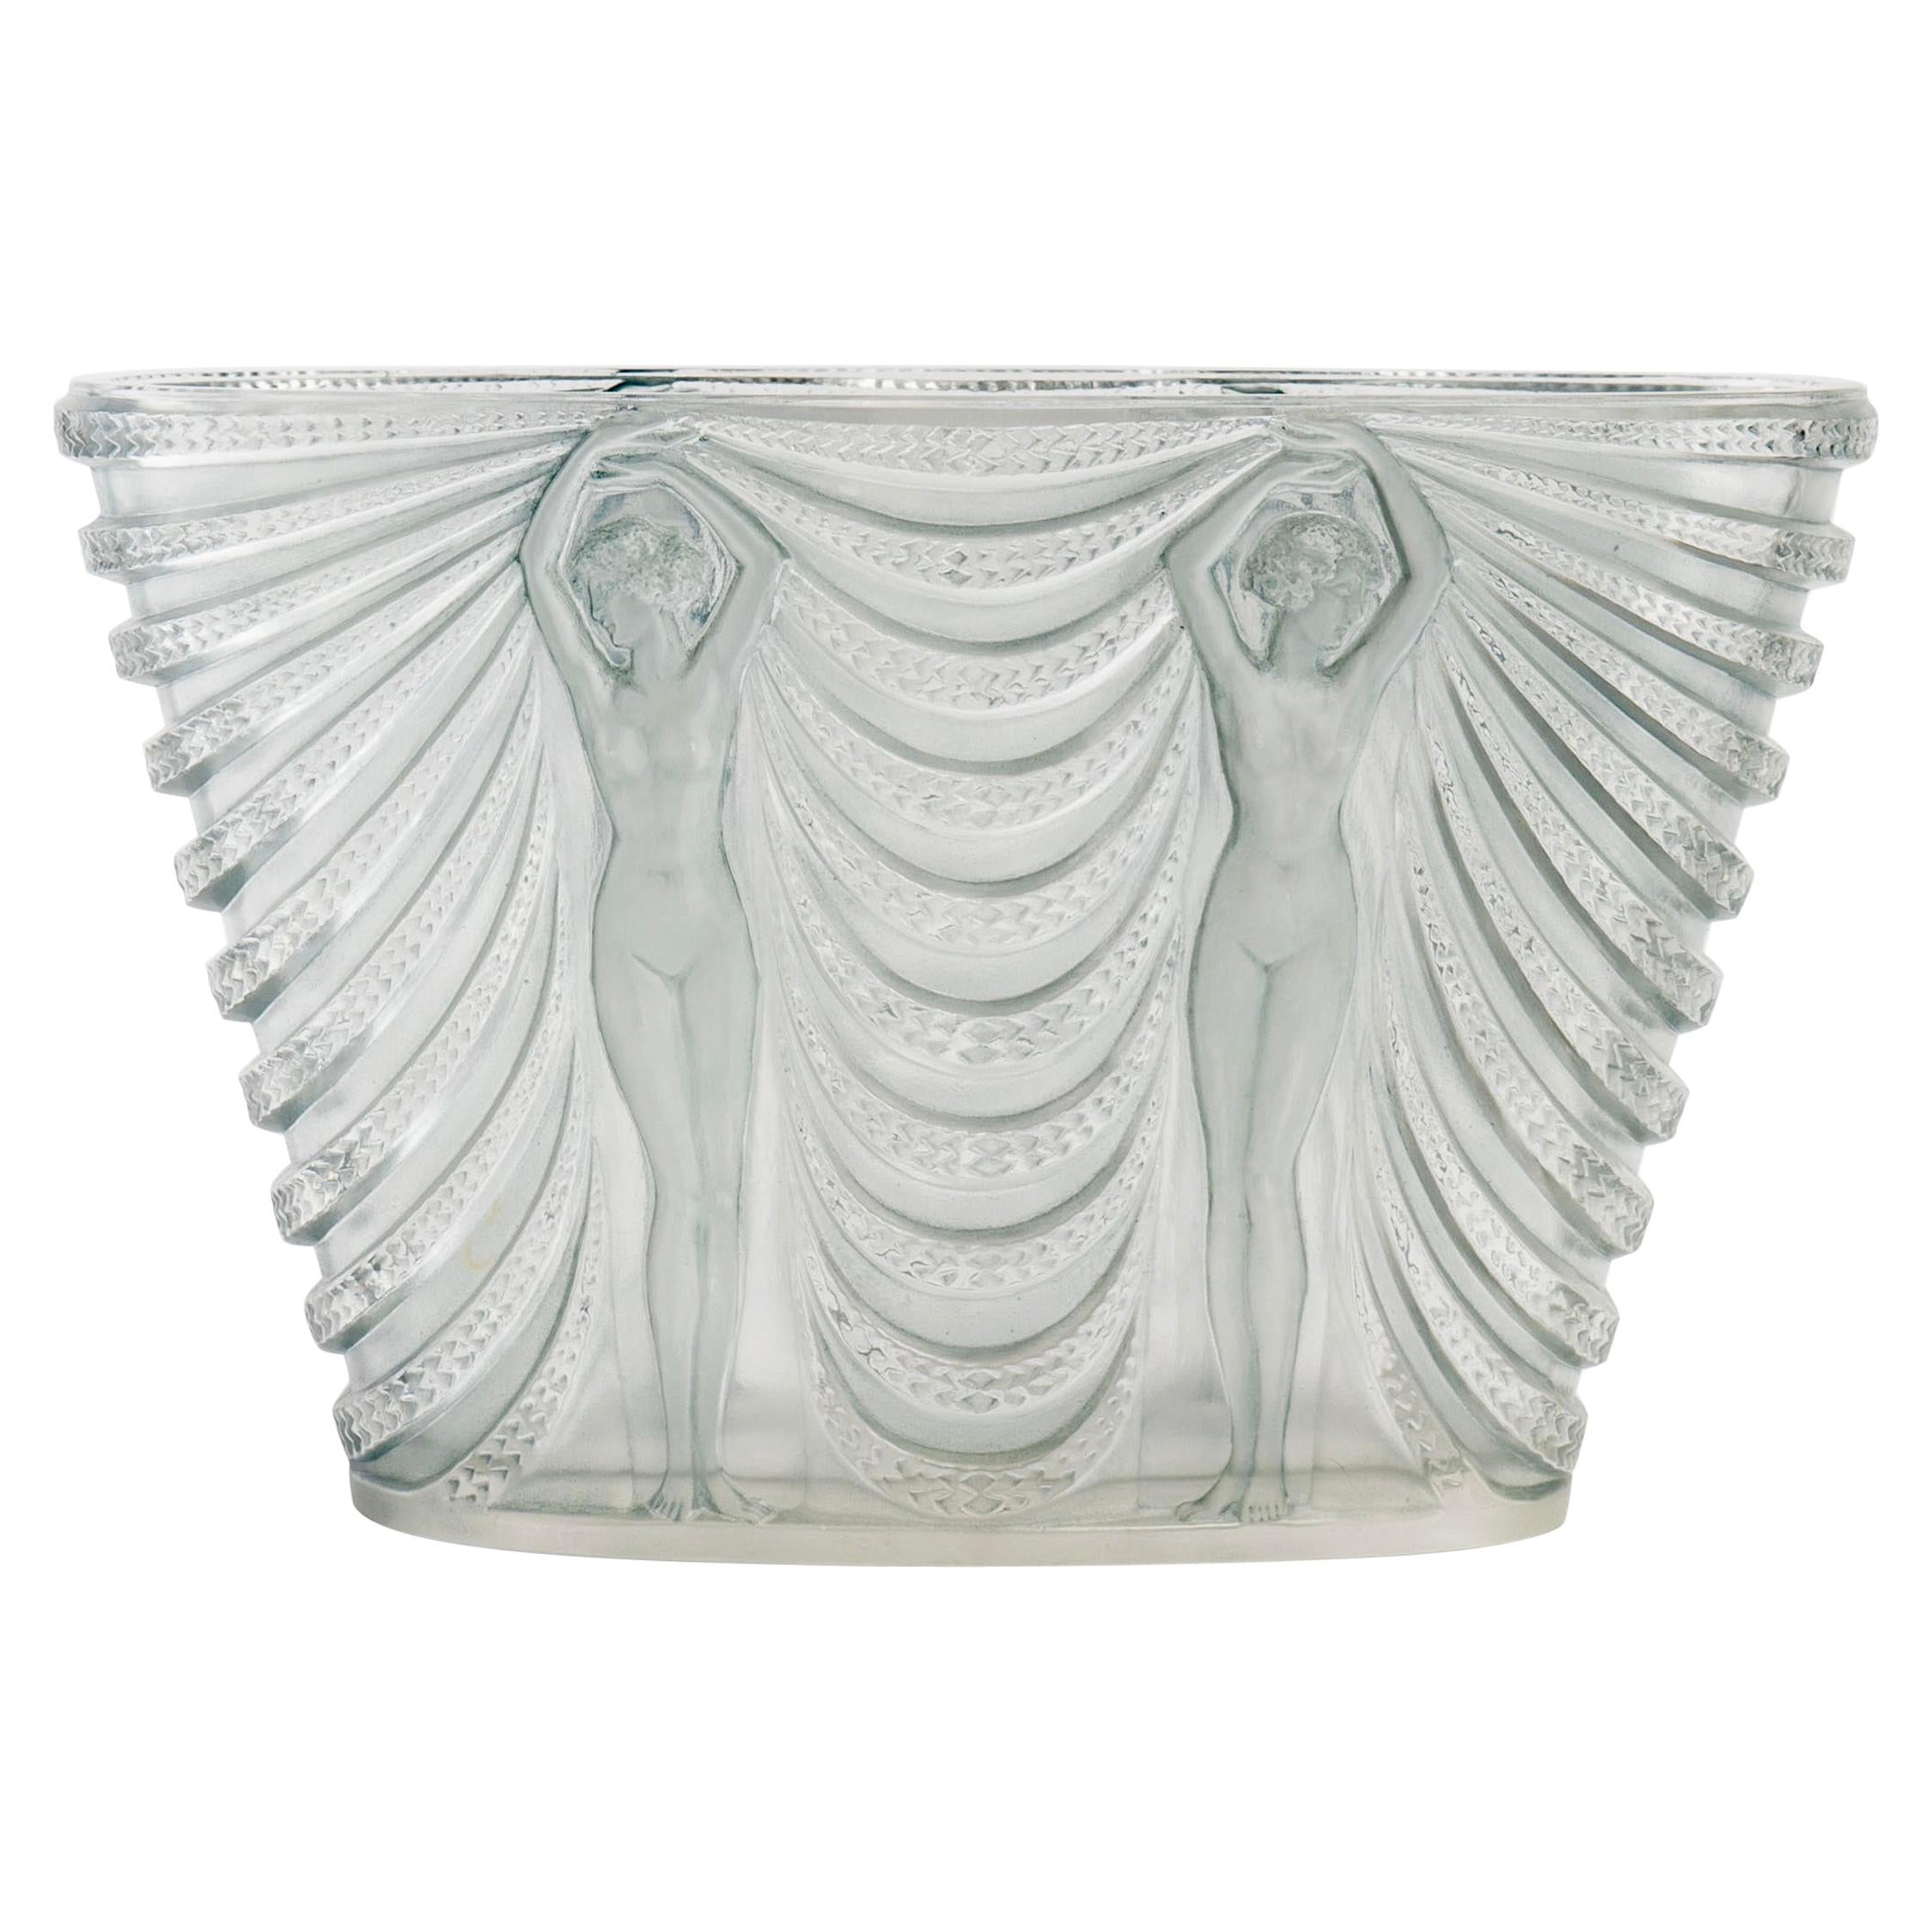 1930 René Lalique Terpsichore Vase in Frosted Glass with Blue Patina